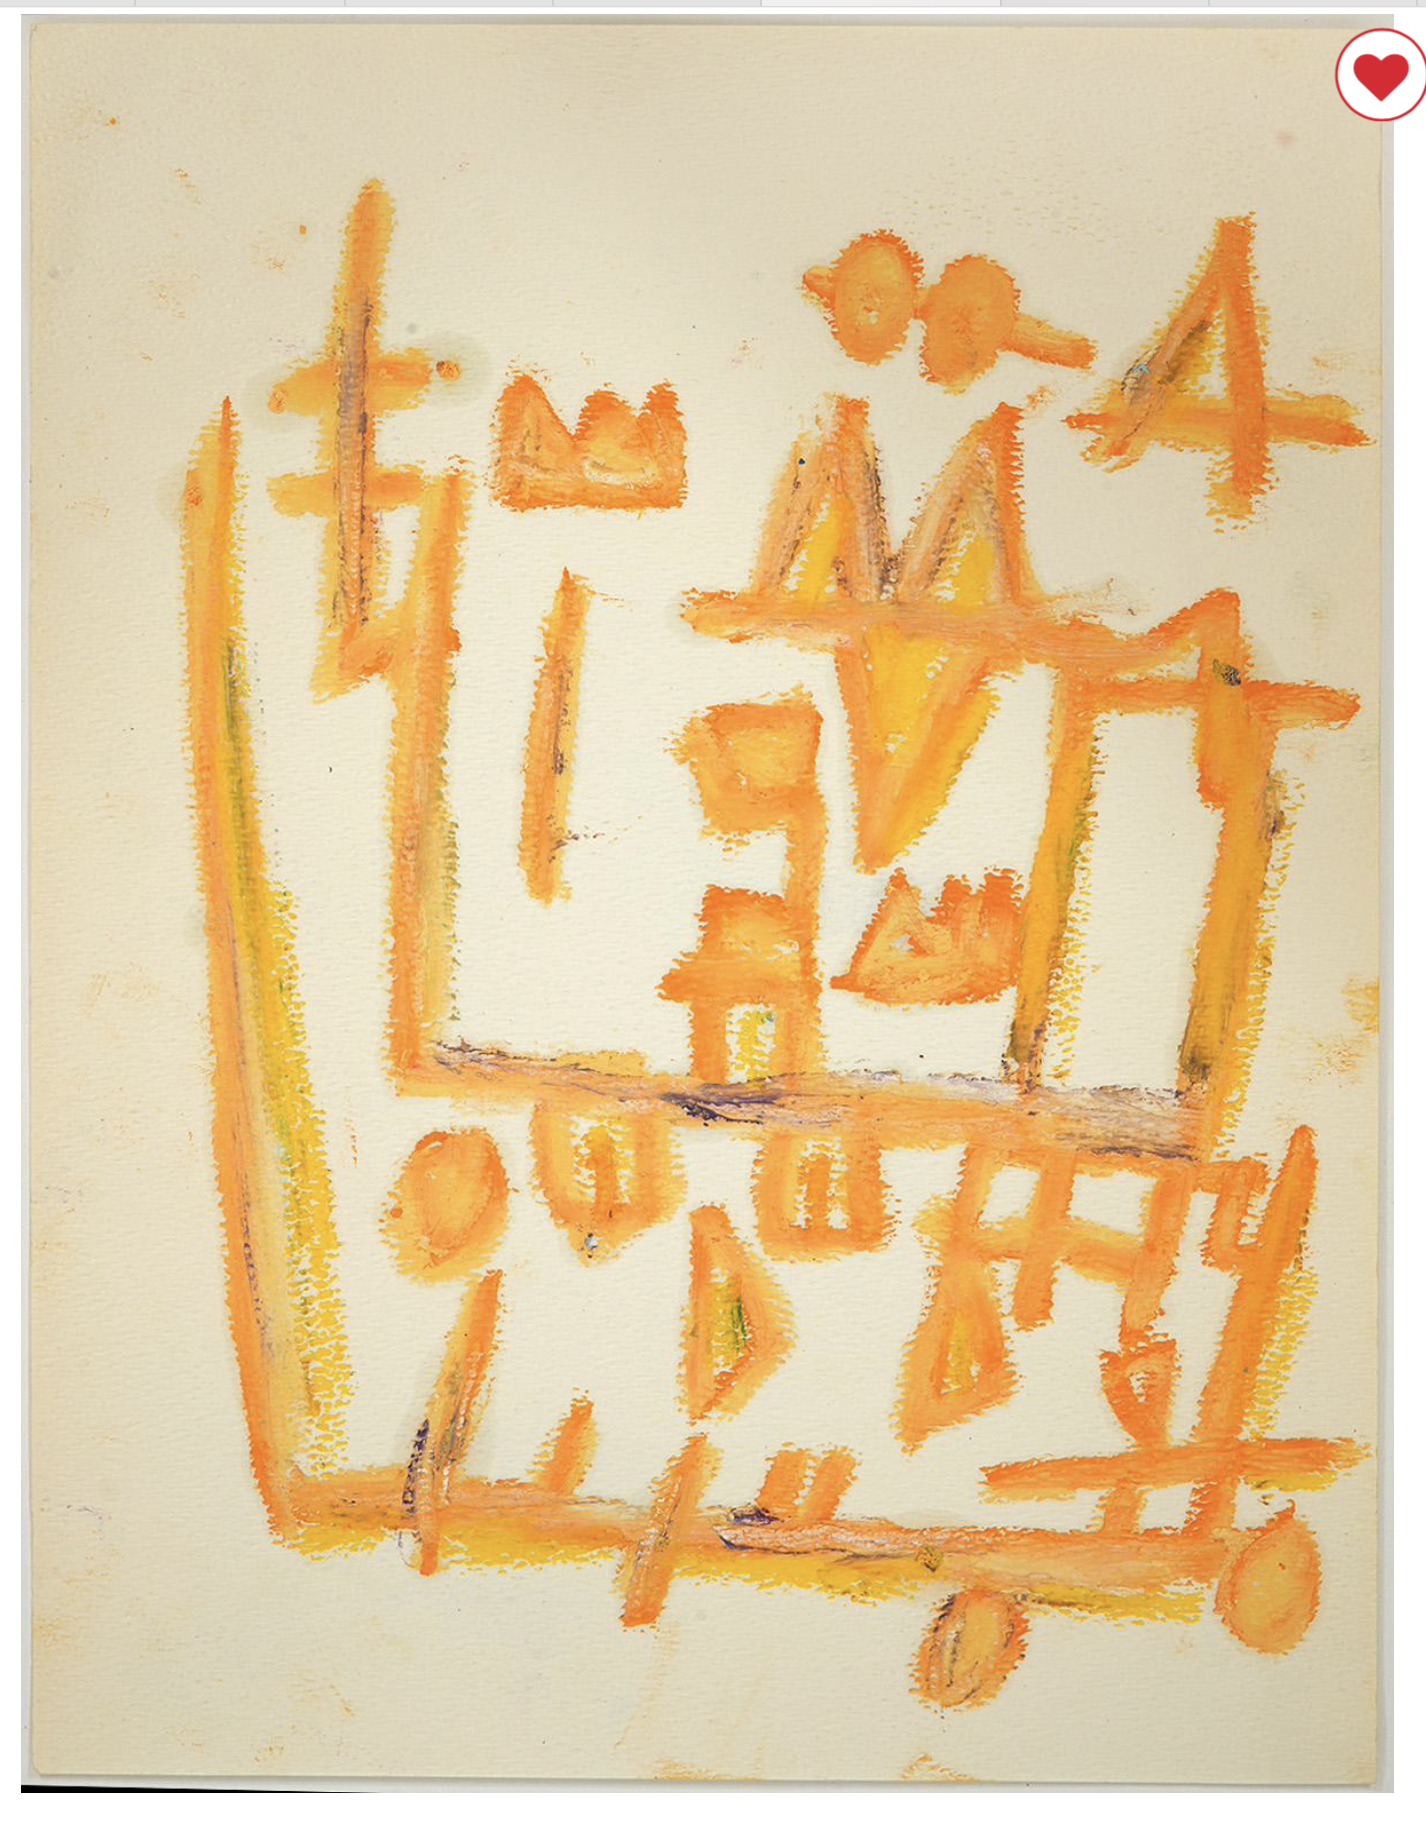 Attributed to Jean-Michel Basquiat, American (1960-1998)